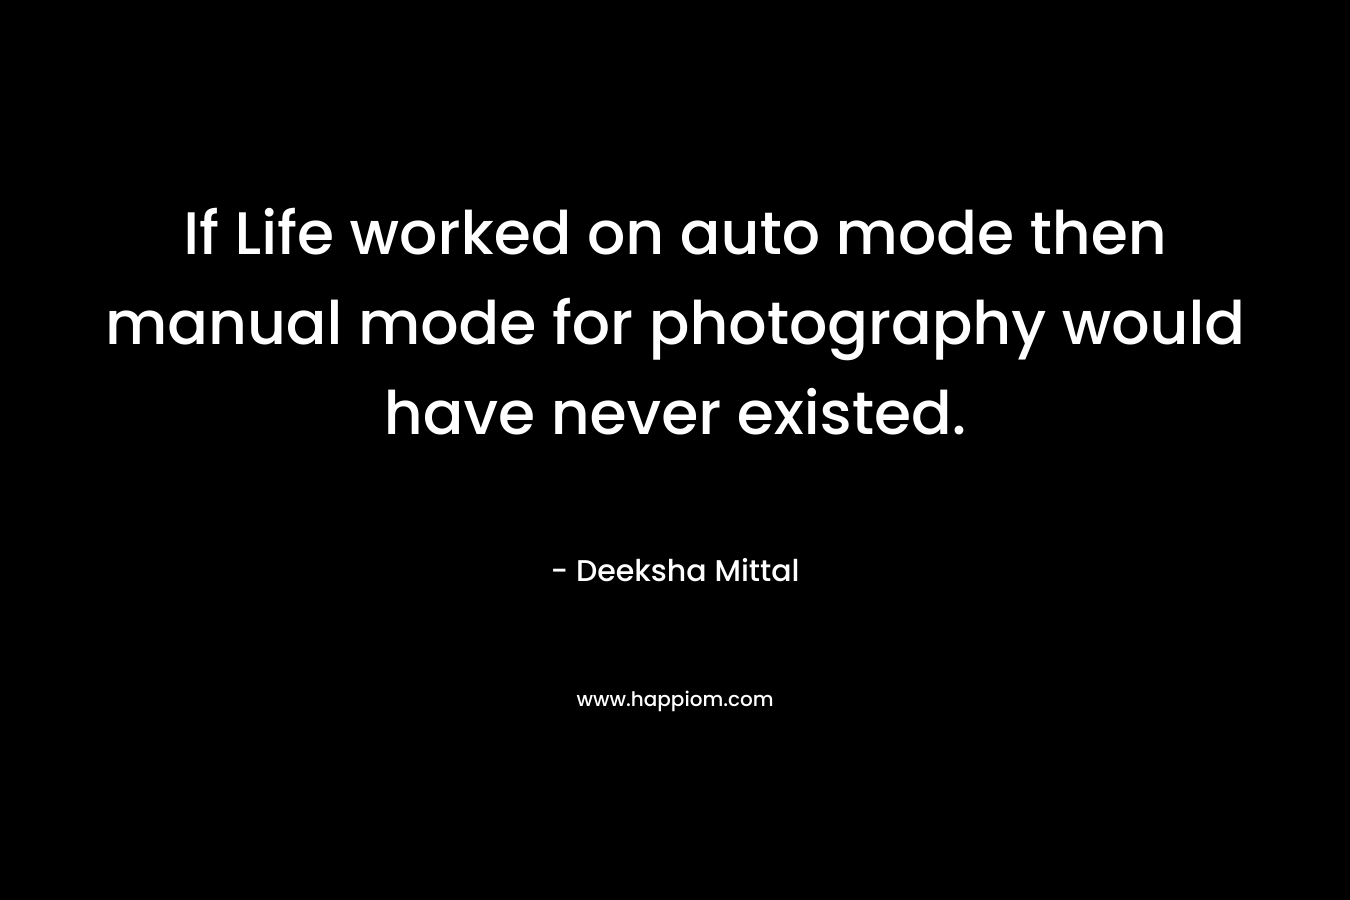 If Life worked on auto mode then manual mode for photography would have never existed.